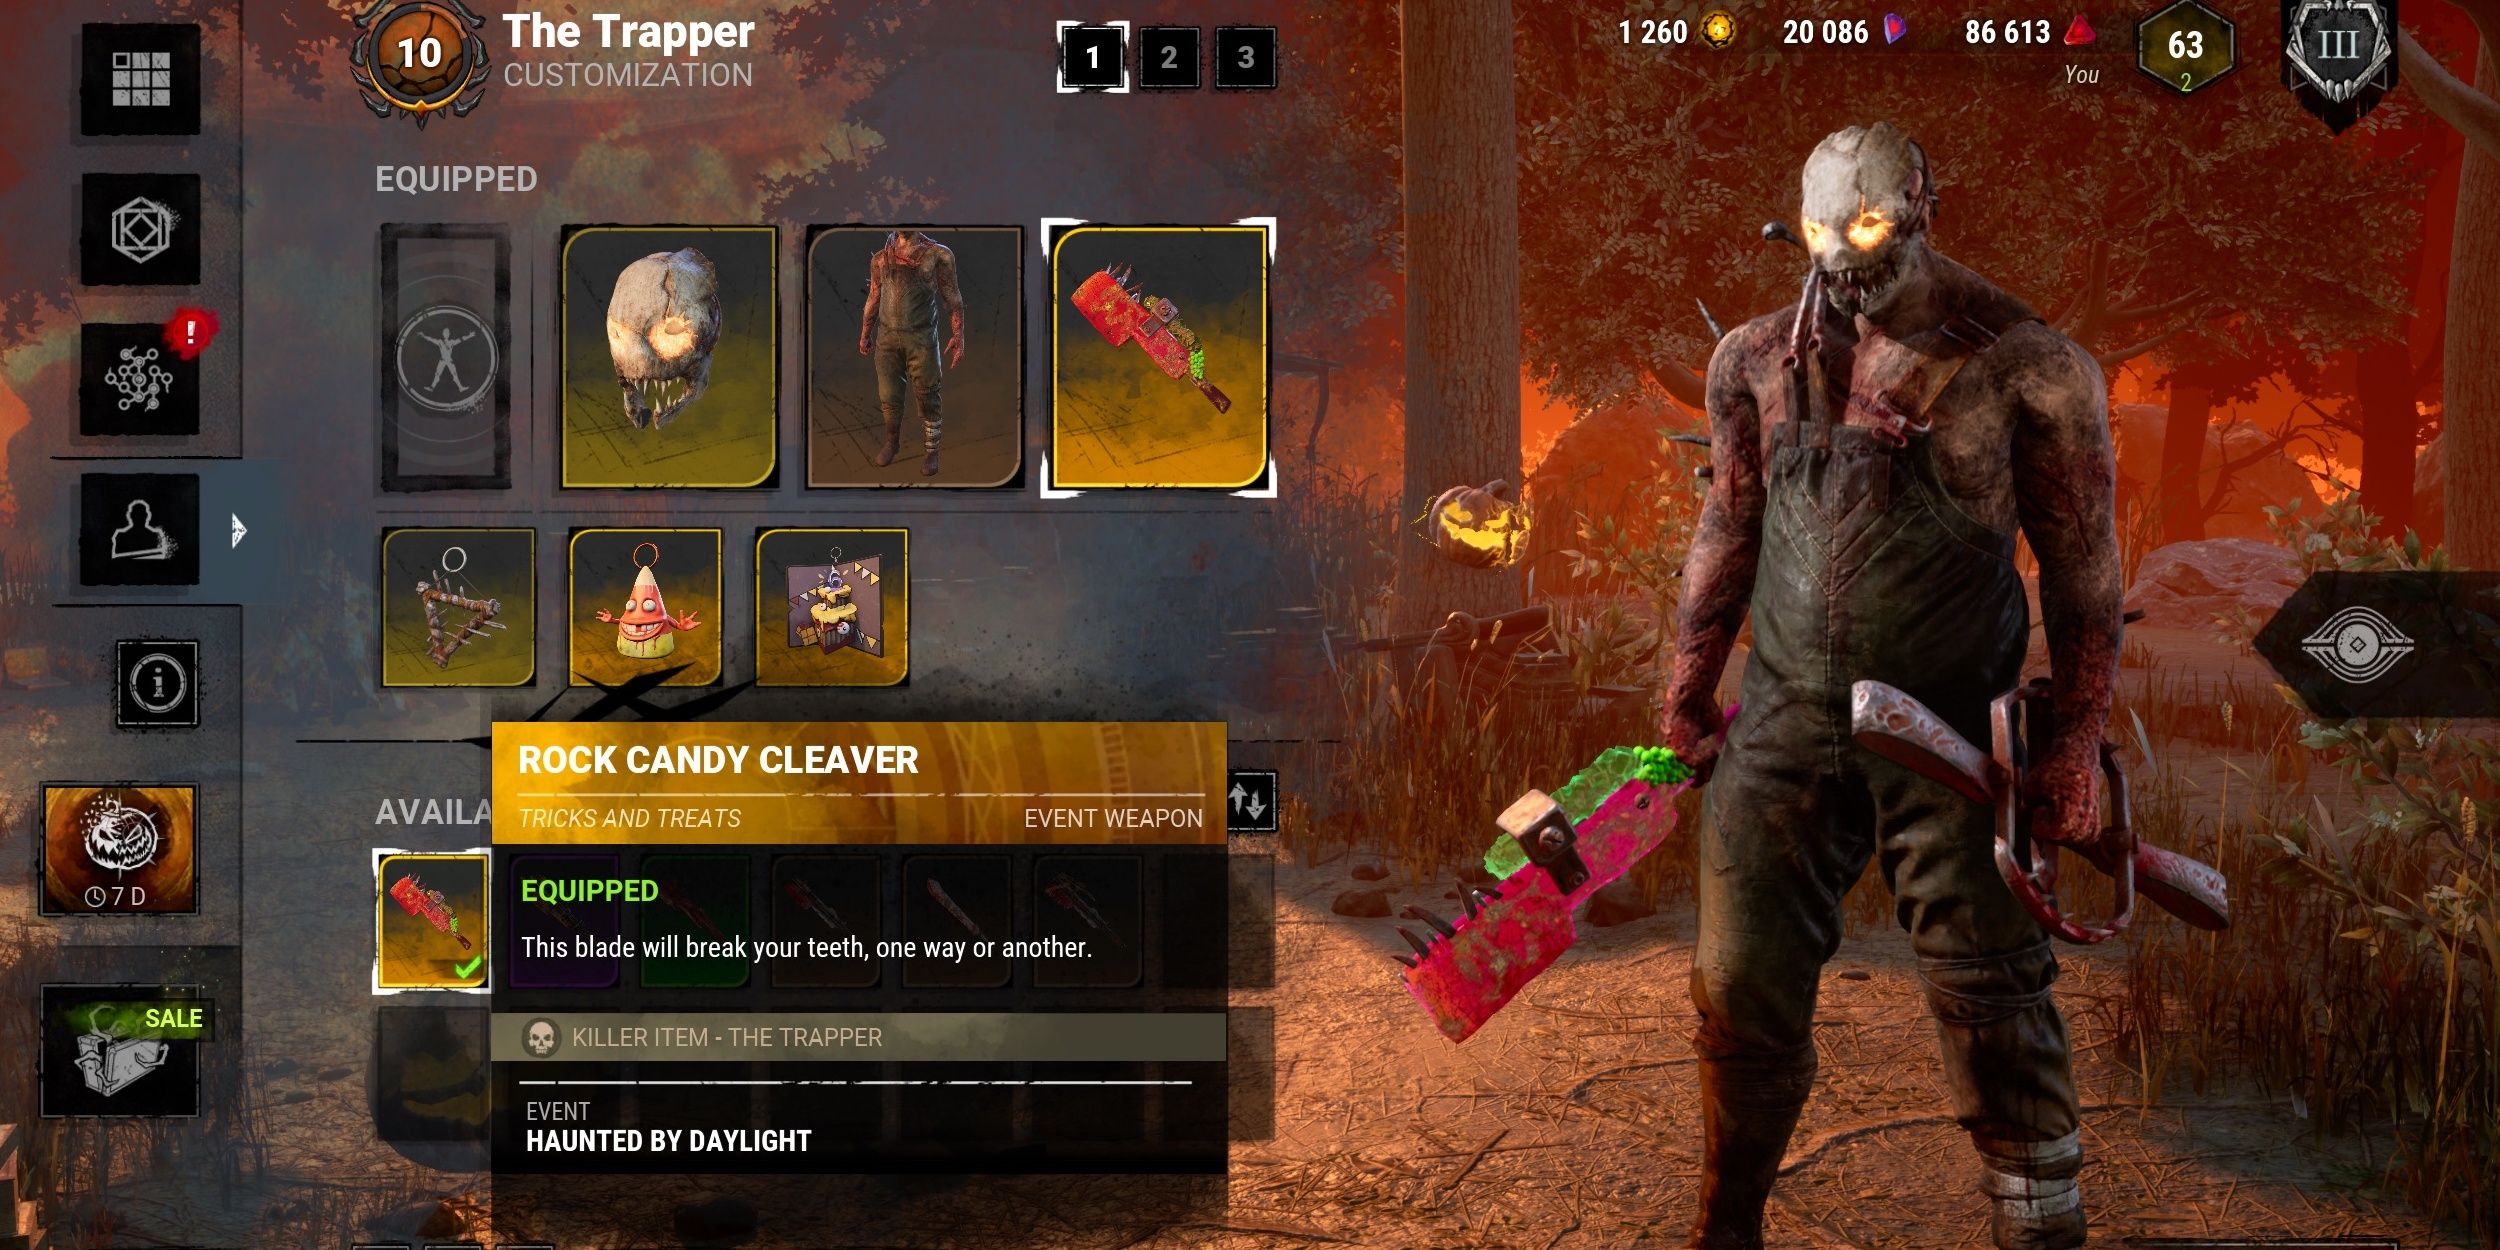 With the big Rock Candy Cleaver, The Trapper goes berserk! And if he hits you in the back, you know it's gonna hurt.